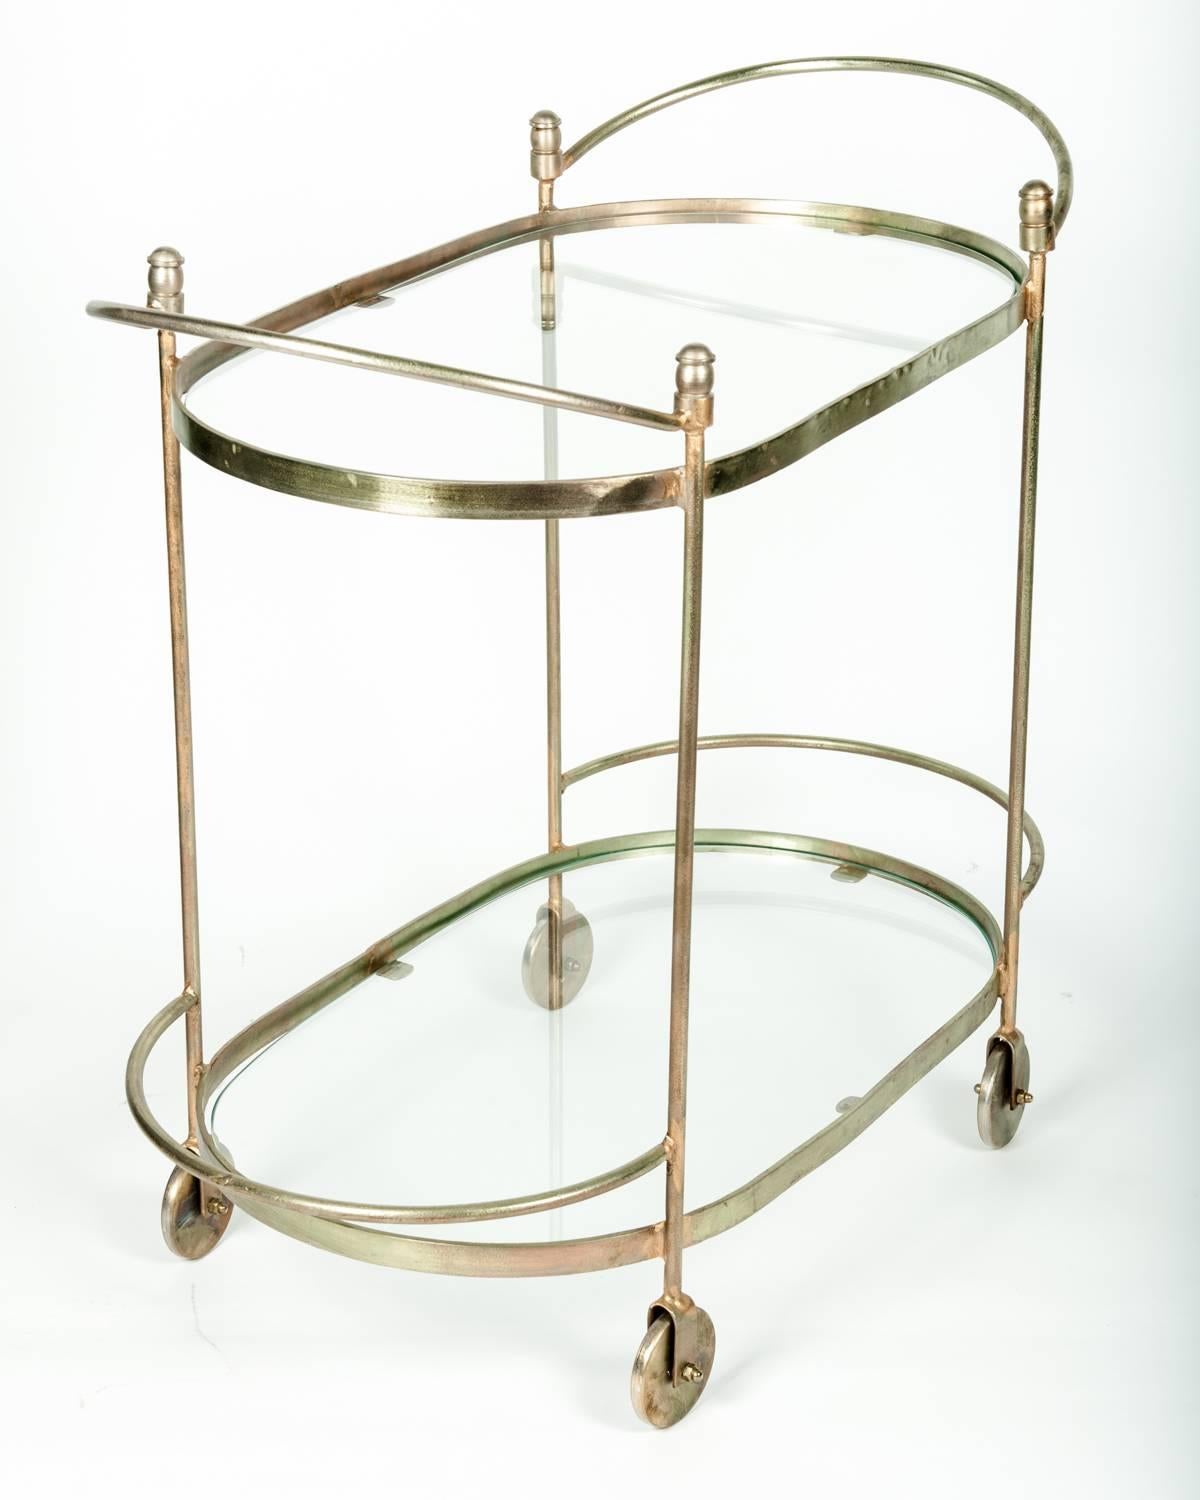 North American Mid-Century Solid Brass Two-Tier Tea Cart or Serving Table